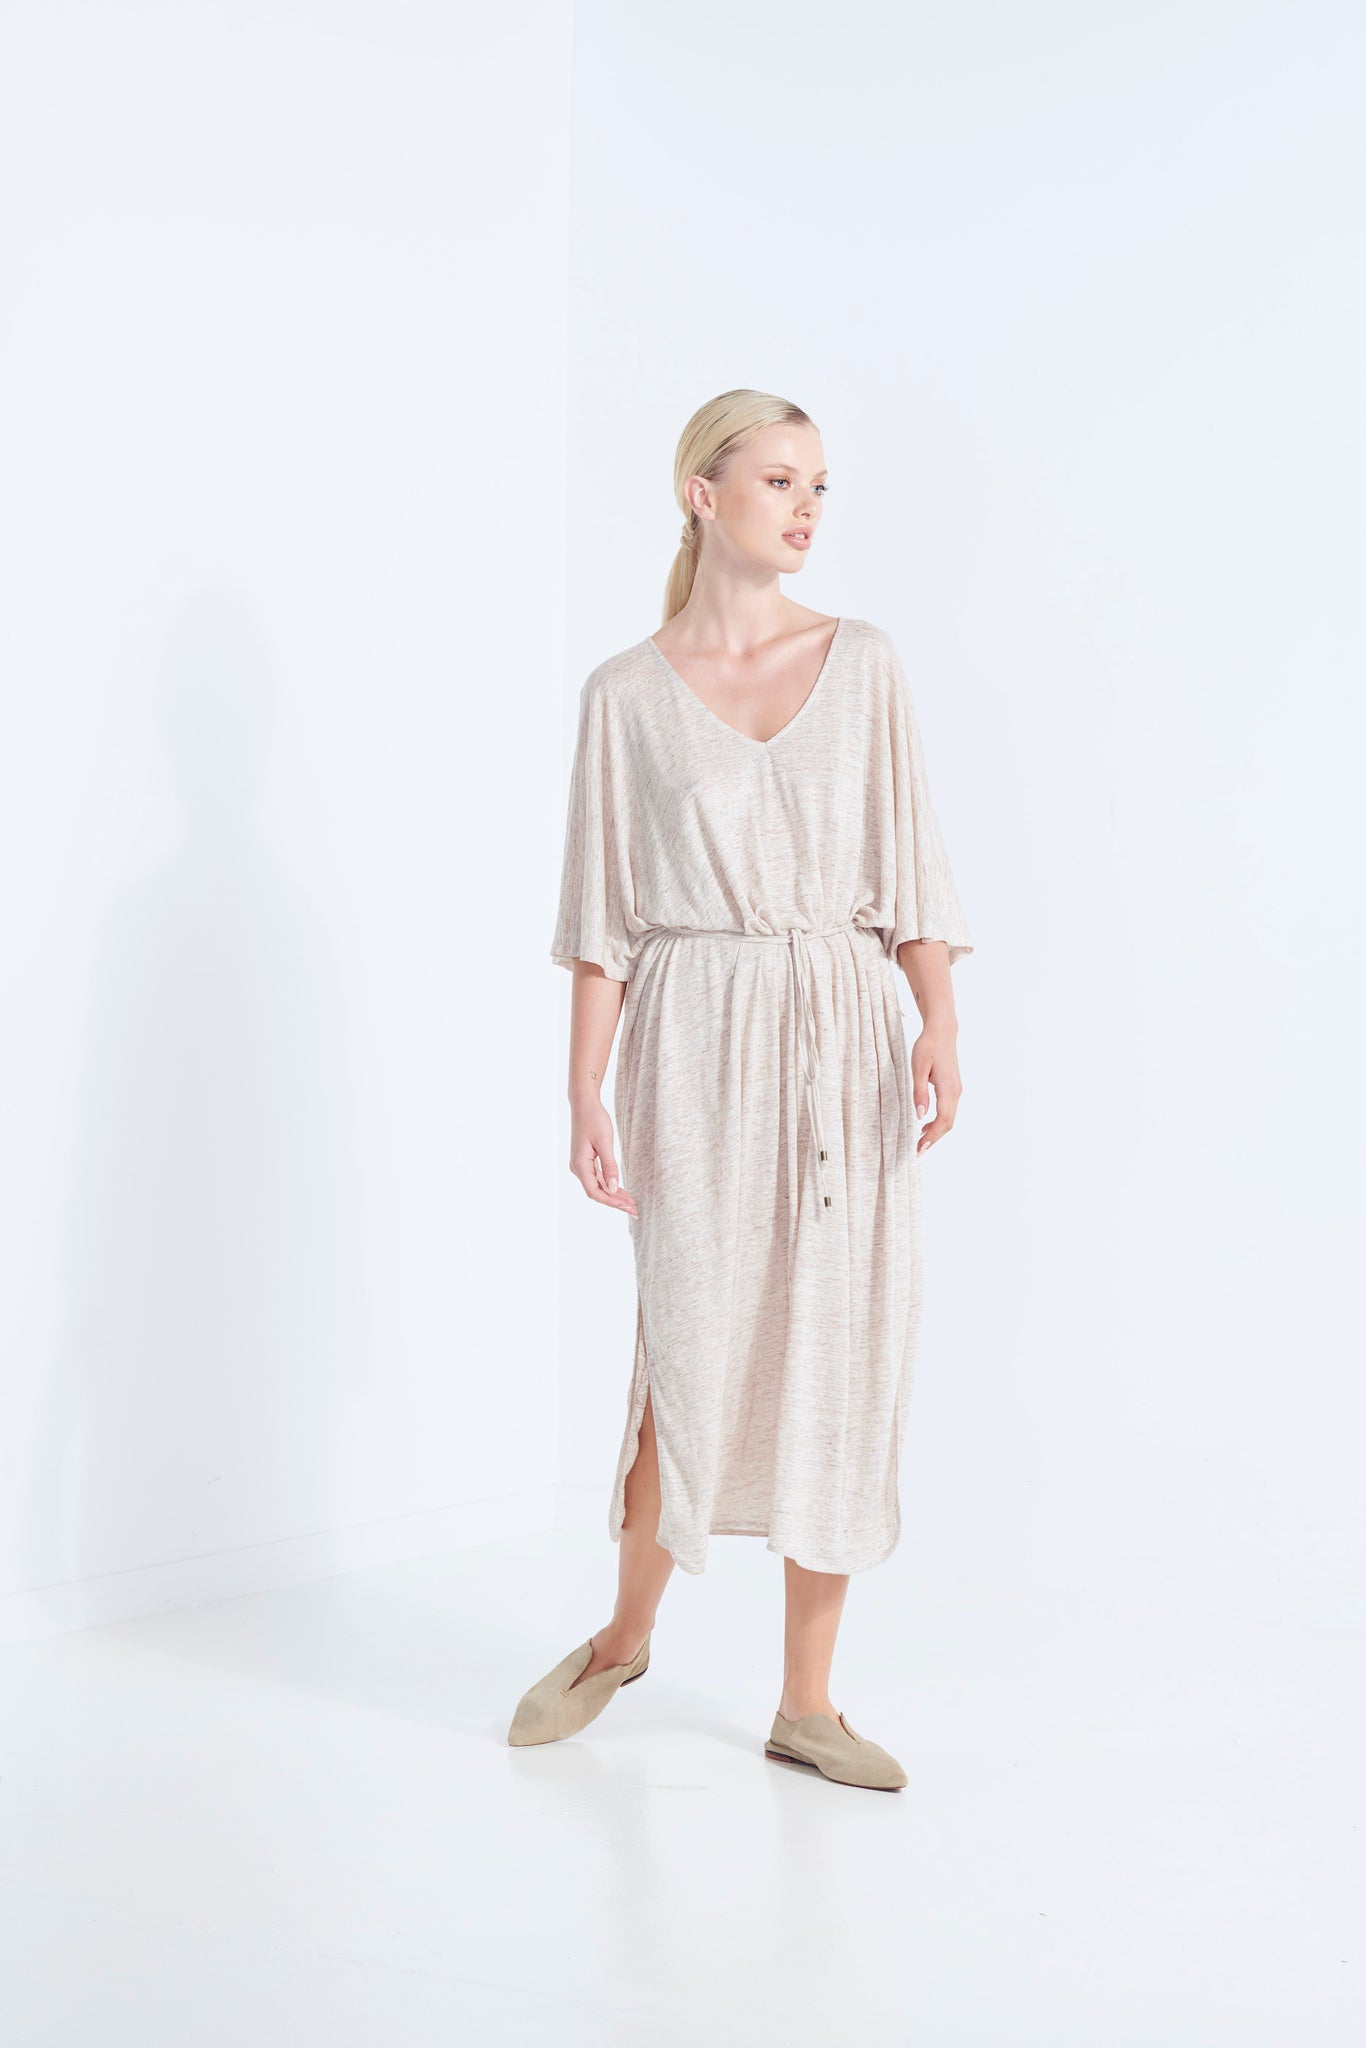 ZEUS DRESS PURE LINEN NATURAL YARN IN WICKER WITH SIDE HEM SCOOP AND SELF FABRIC TIE SIDE FRONT VIEW WITH TIE